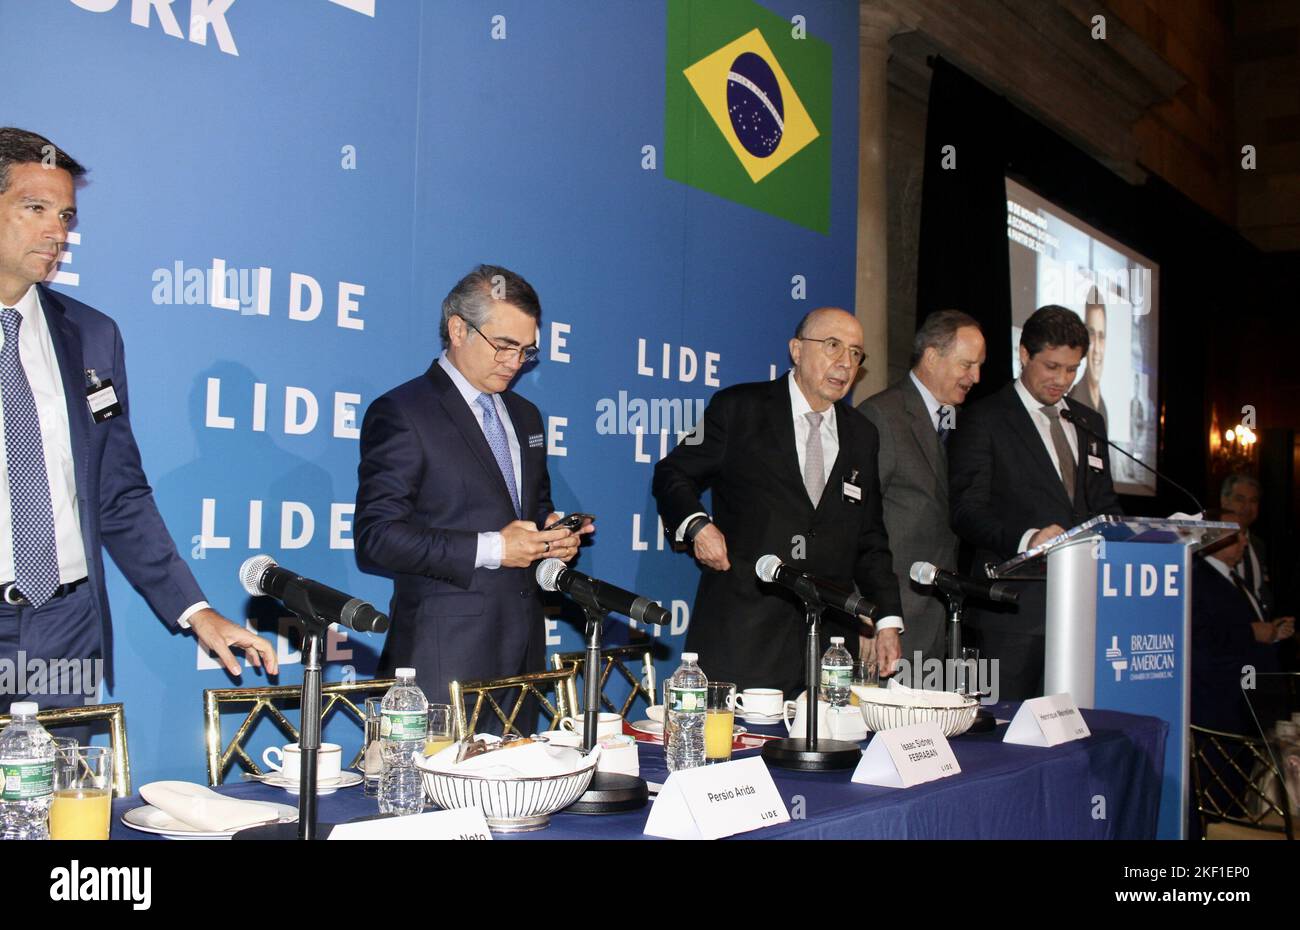 New York, USA. 15th Nov, 2022. (NEW) The LIDE Brazil Conference-NY : ''The Brazilian Economy in 2023 and Beyond.'' November 15, 2022, New York, USA: The LIDE Brazil Conference - New York : ''The Brazilian Economy in 2023 and Beyond '' is taking place on November 15th at the Harvard Club in New York with the presence Roberto Campos Neto (president of the Central Bank), Henrique Meirelles (former Finance Minister and president of the Central Bank), Isaac Sidney (president of Brazilian Federation of Banks), Joaquim Levy (director of Banco Safra and former Finance Minister), Persio Arida (forme Stock Photo